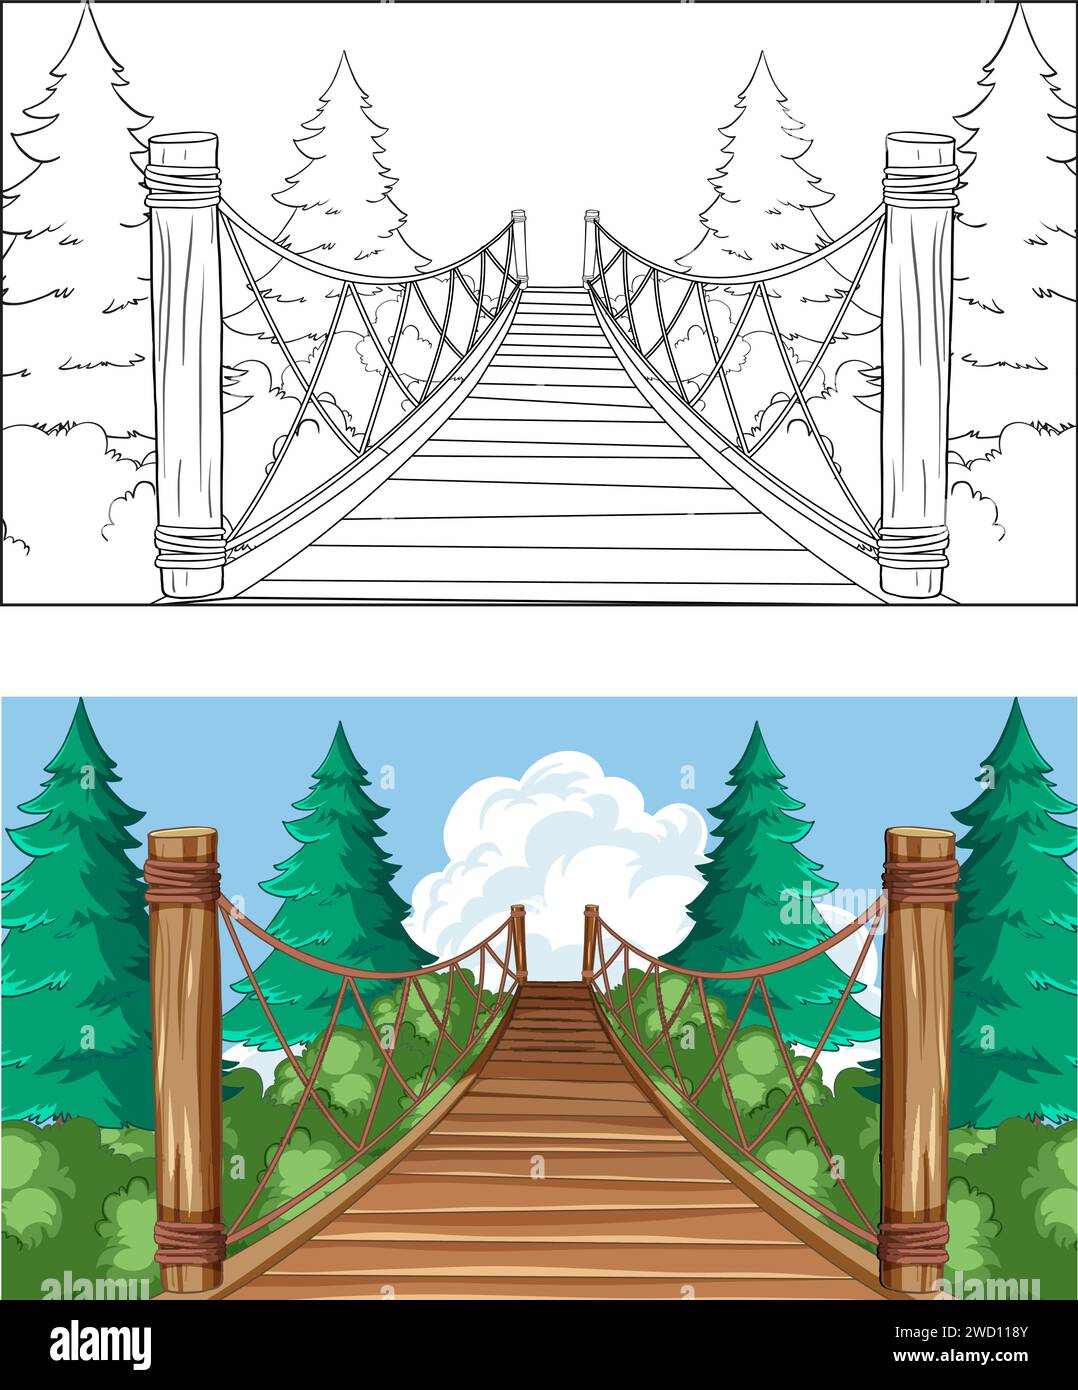 Rope bridge drawing Cut Out Stock Images & Pictures - Alamy